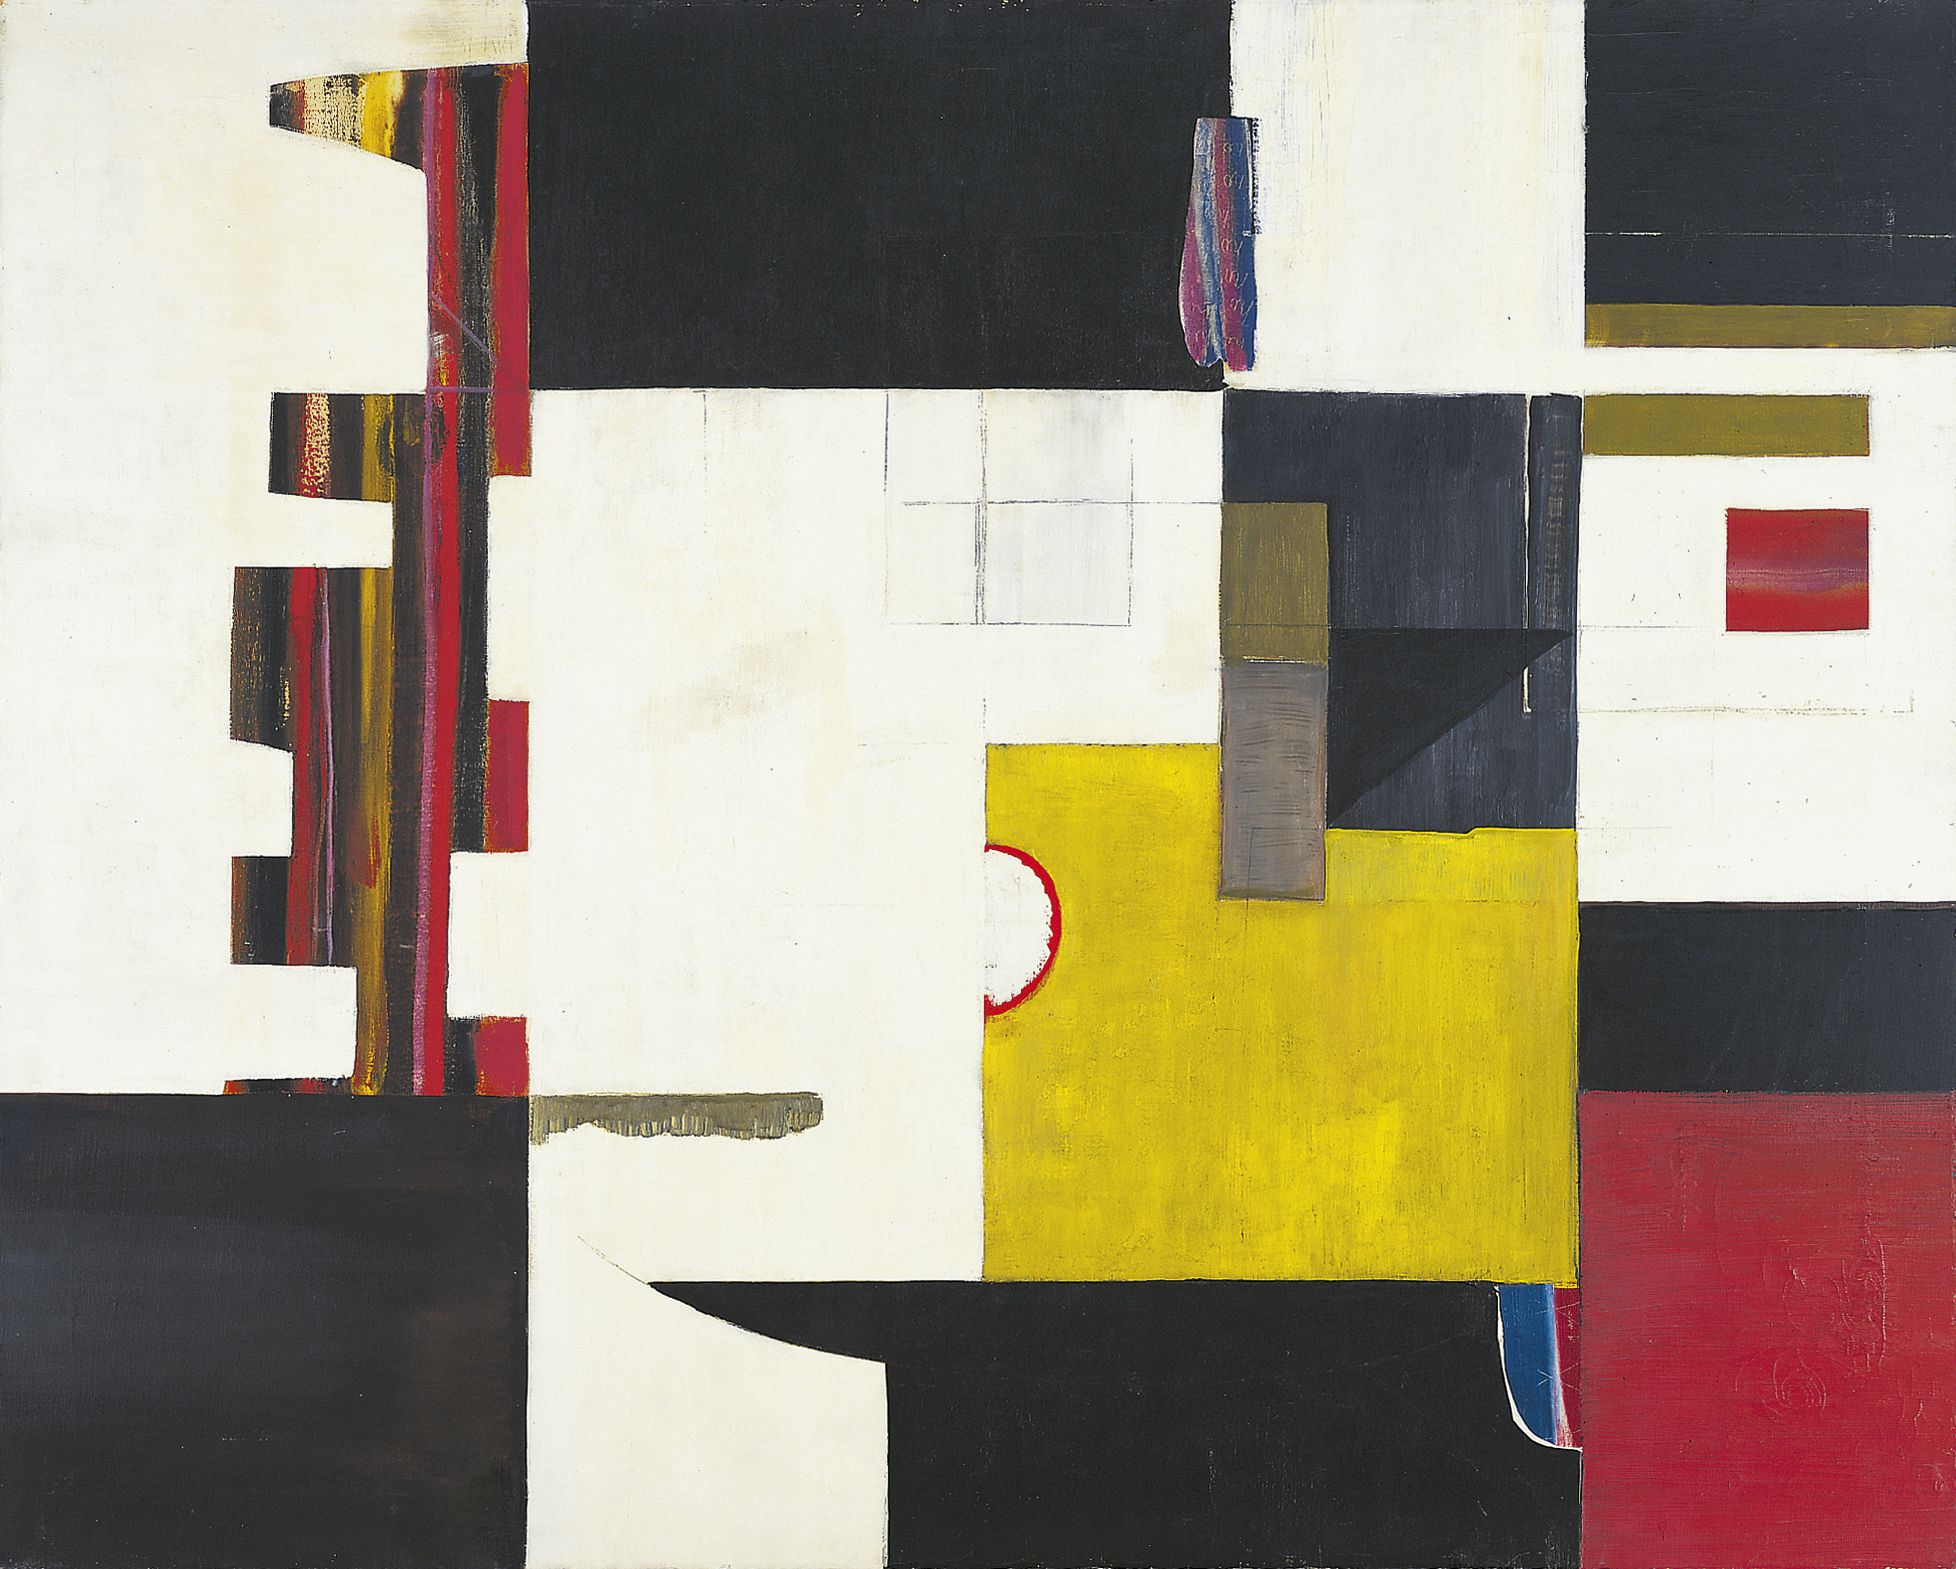 The Sentinel, 1943. Oil and graphite on canvas, 33 7/8 x 41 7/8 inches (86 x 106.4 cm)